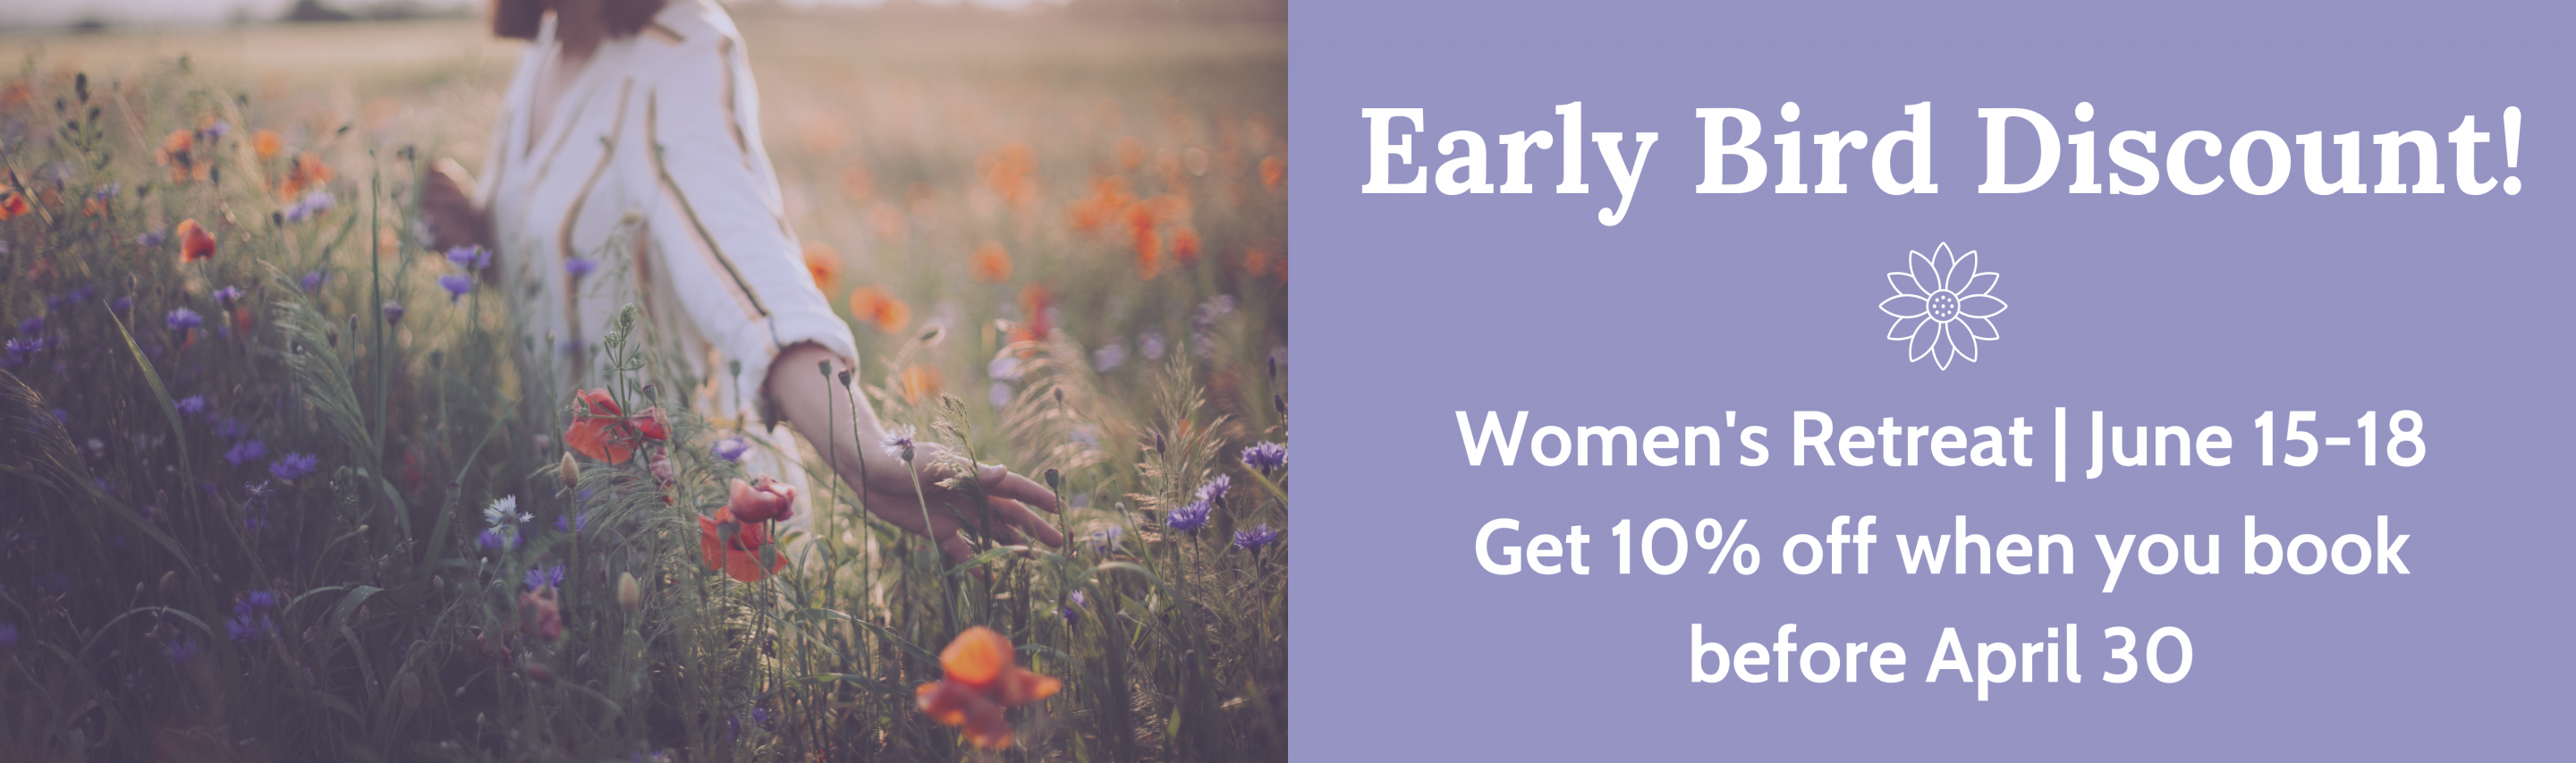 Banner Reading: Early Bird Discount! Women's Retreat | June 15 -18 Save 10% when you book by April 30. Image of a woman brushing her hand through a field of wildflowers